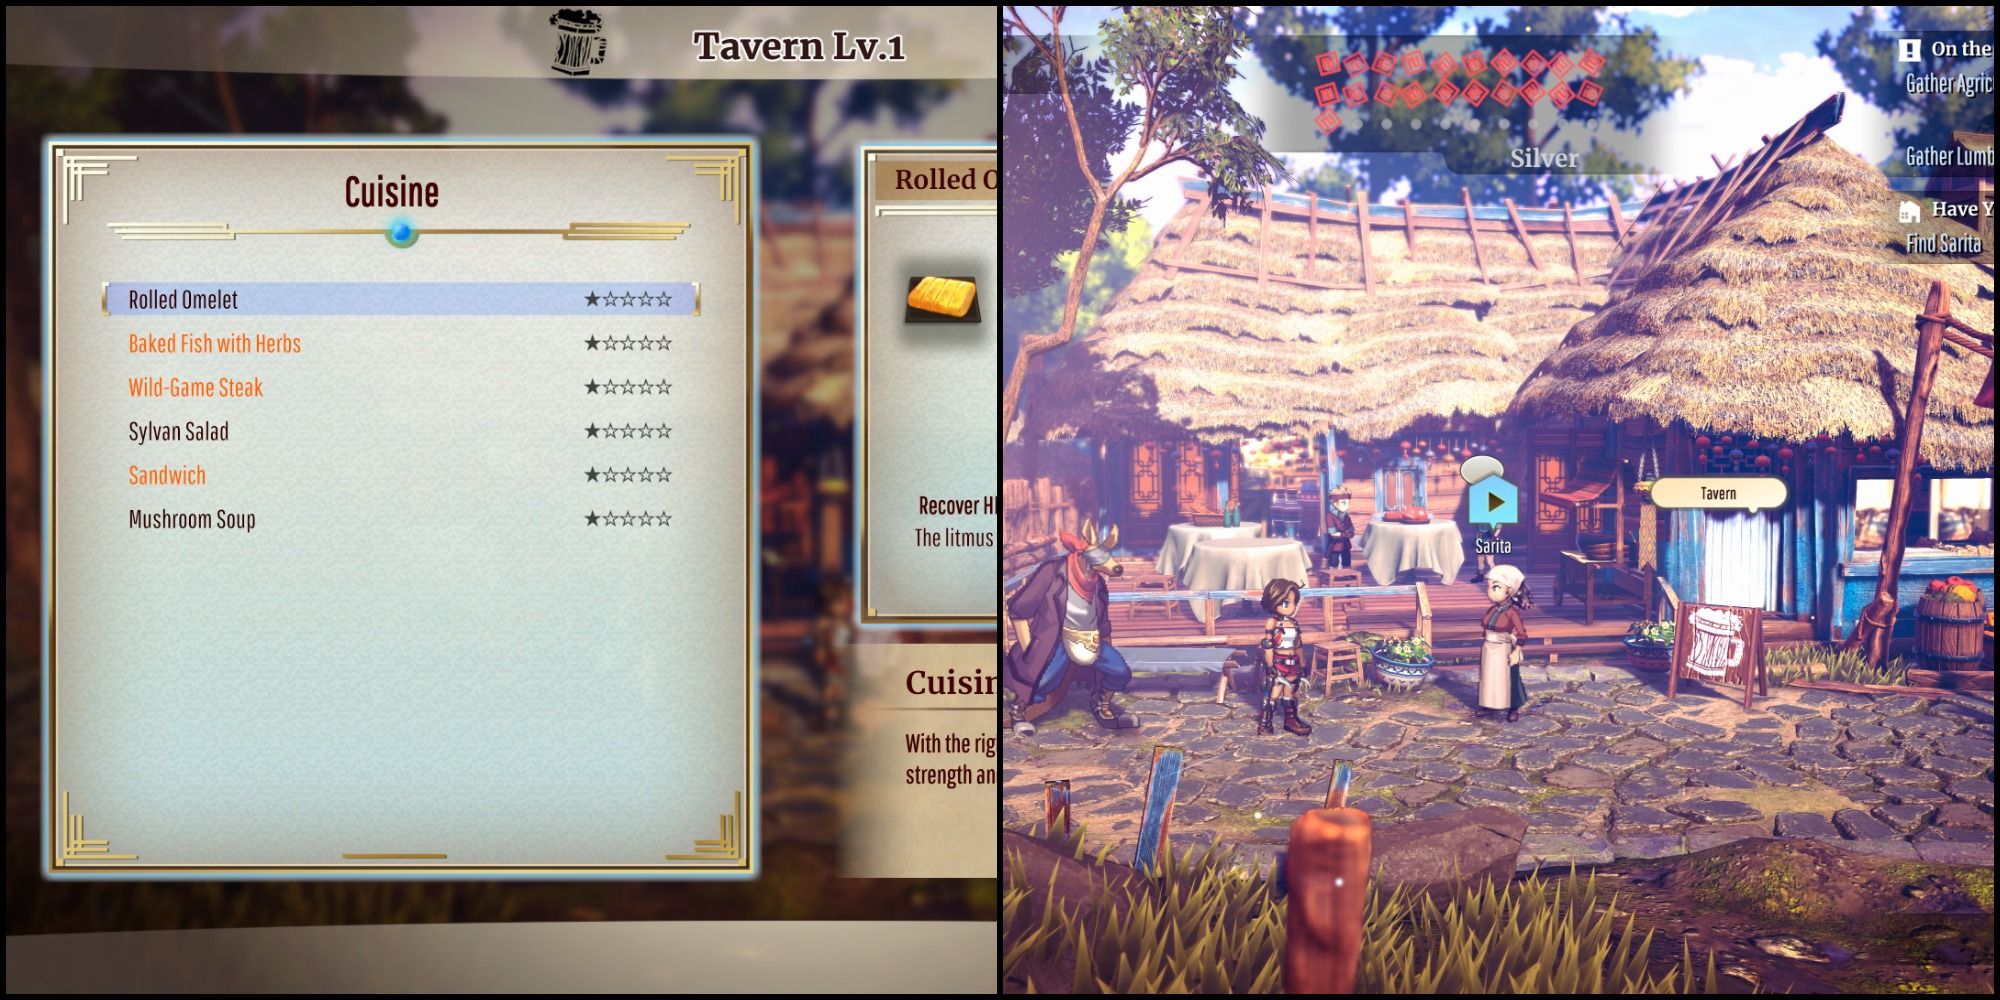 A split image of the Tavern's menu and the Tavern itself.